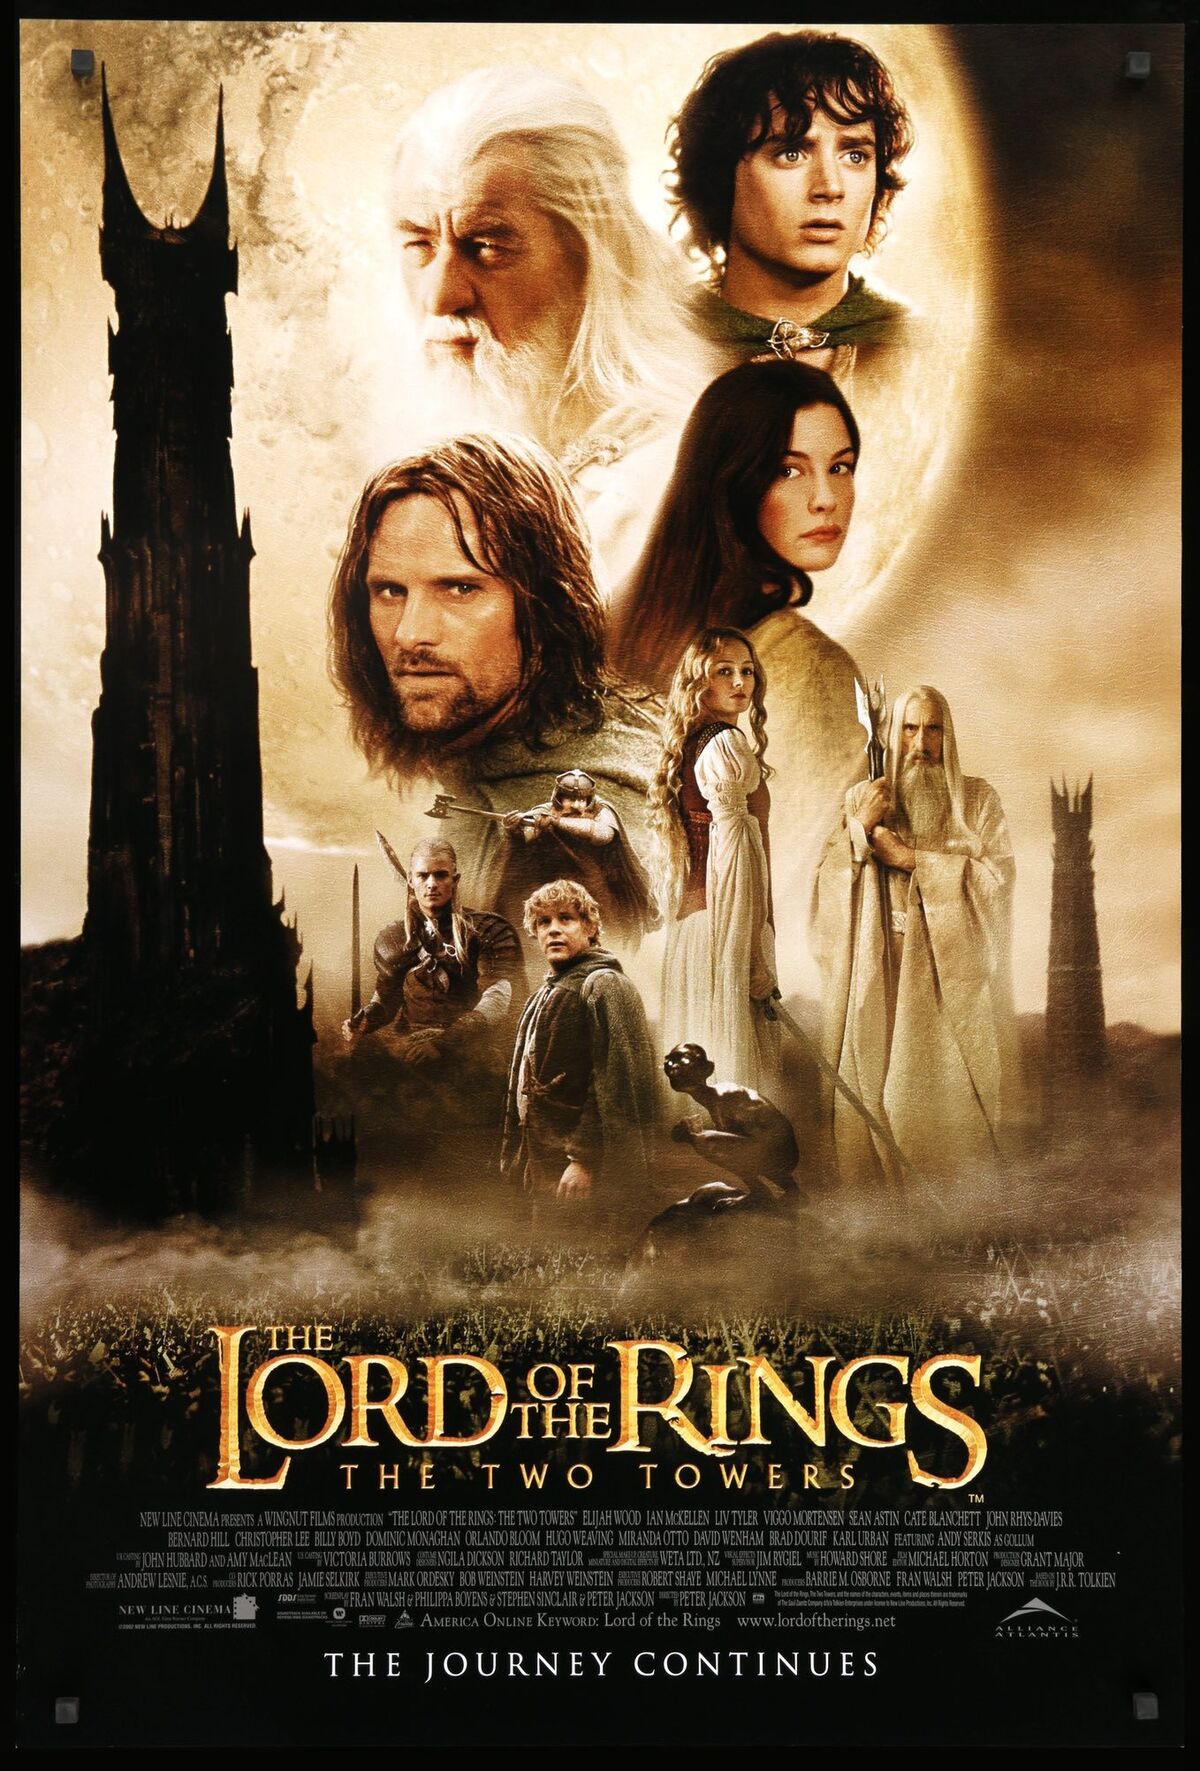 inch musical restaurant The Lord of the Rings: The Two Towers | Moviepedia | Fandom